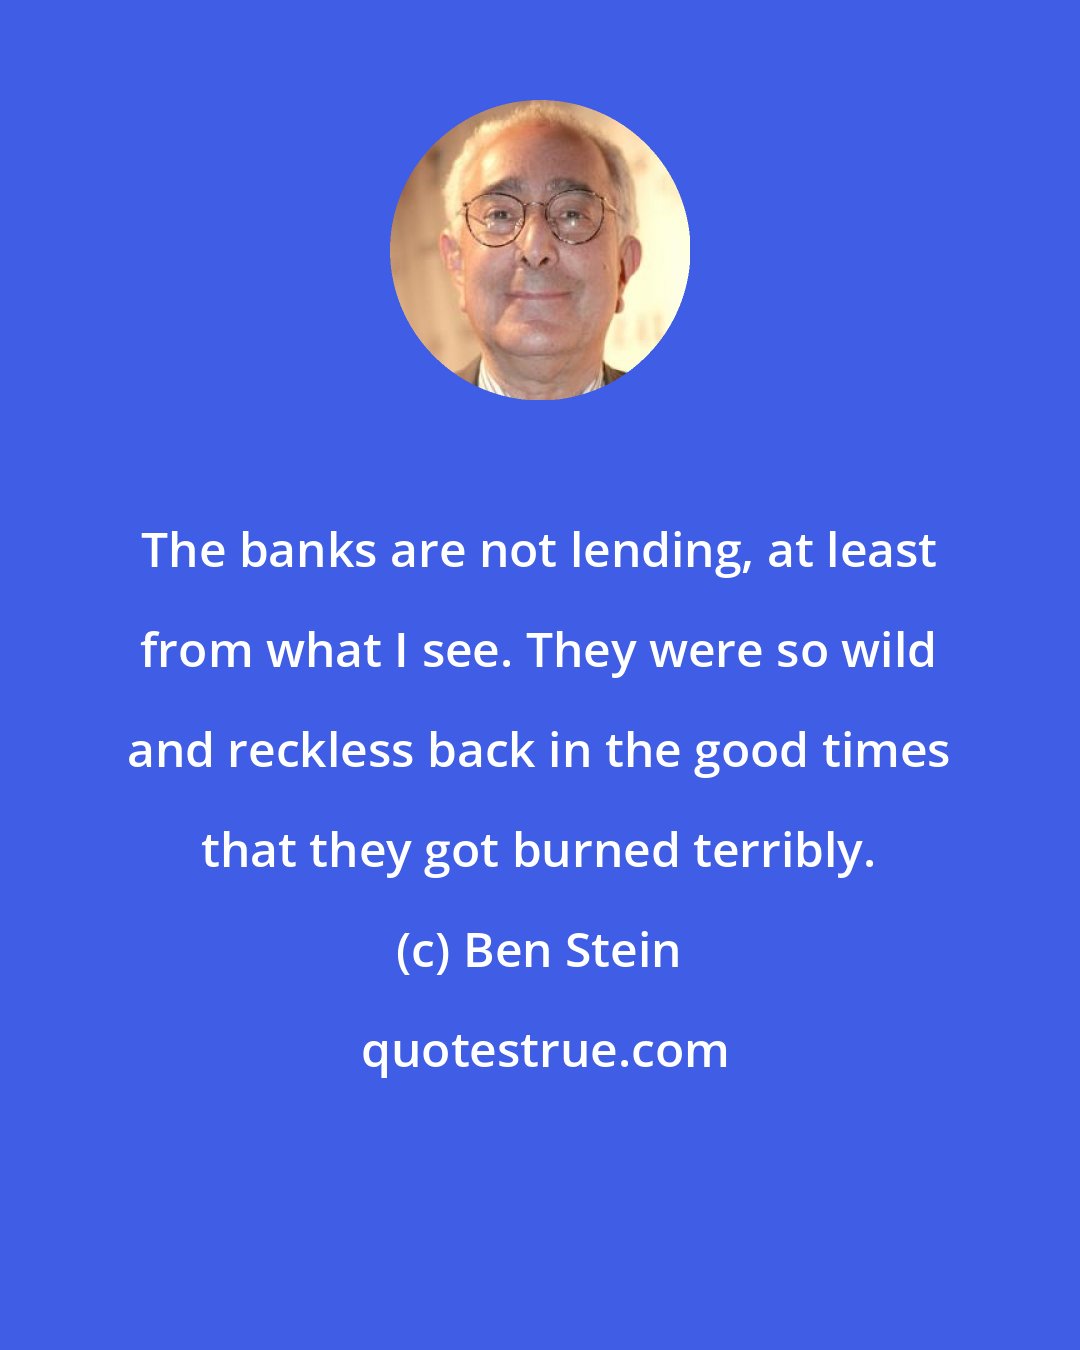 Ben Stein: The banks are not lending, at least from what I see. They were so wild and reckless back in the good times that they got burned terribly.